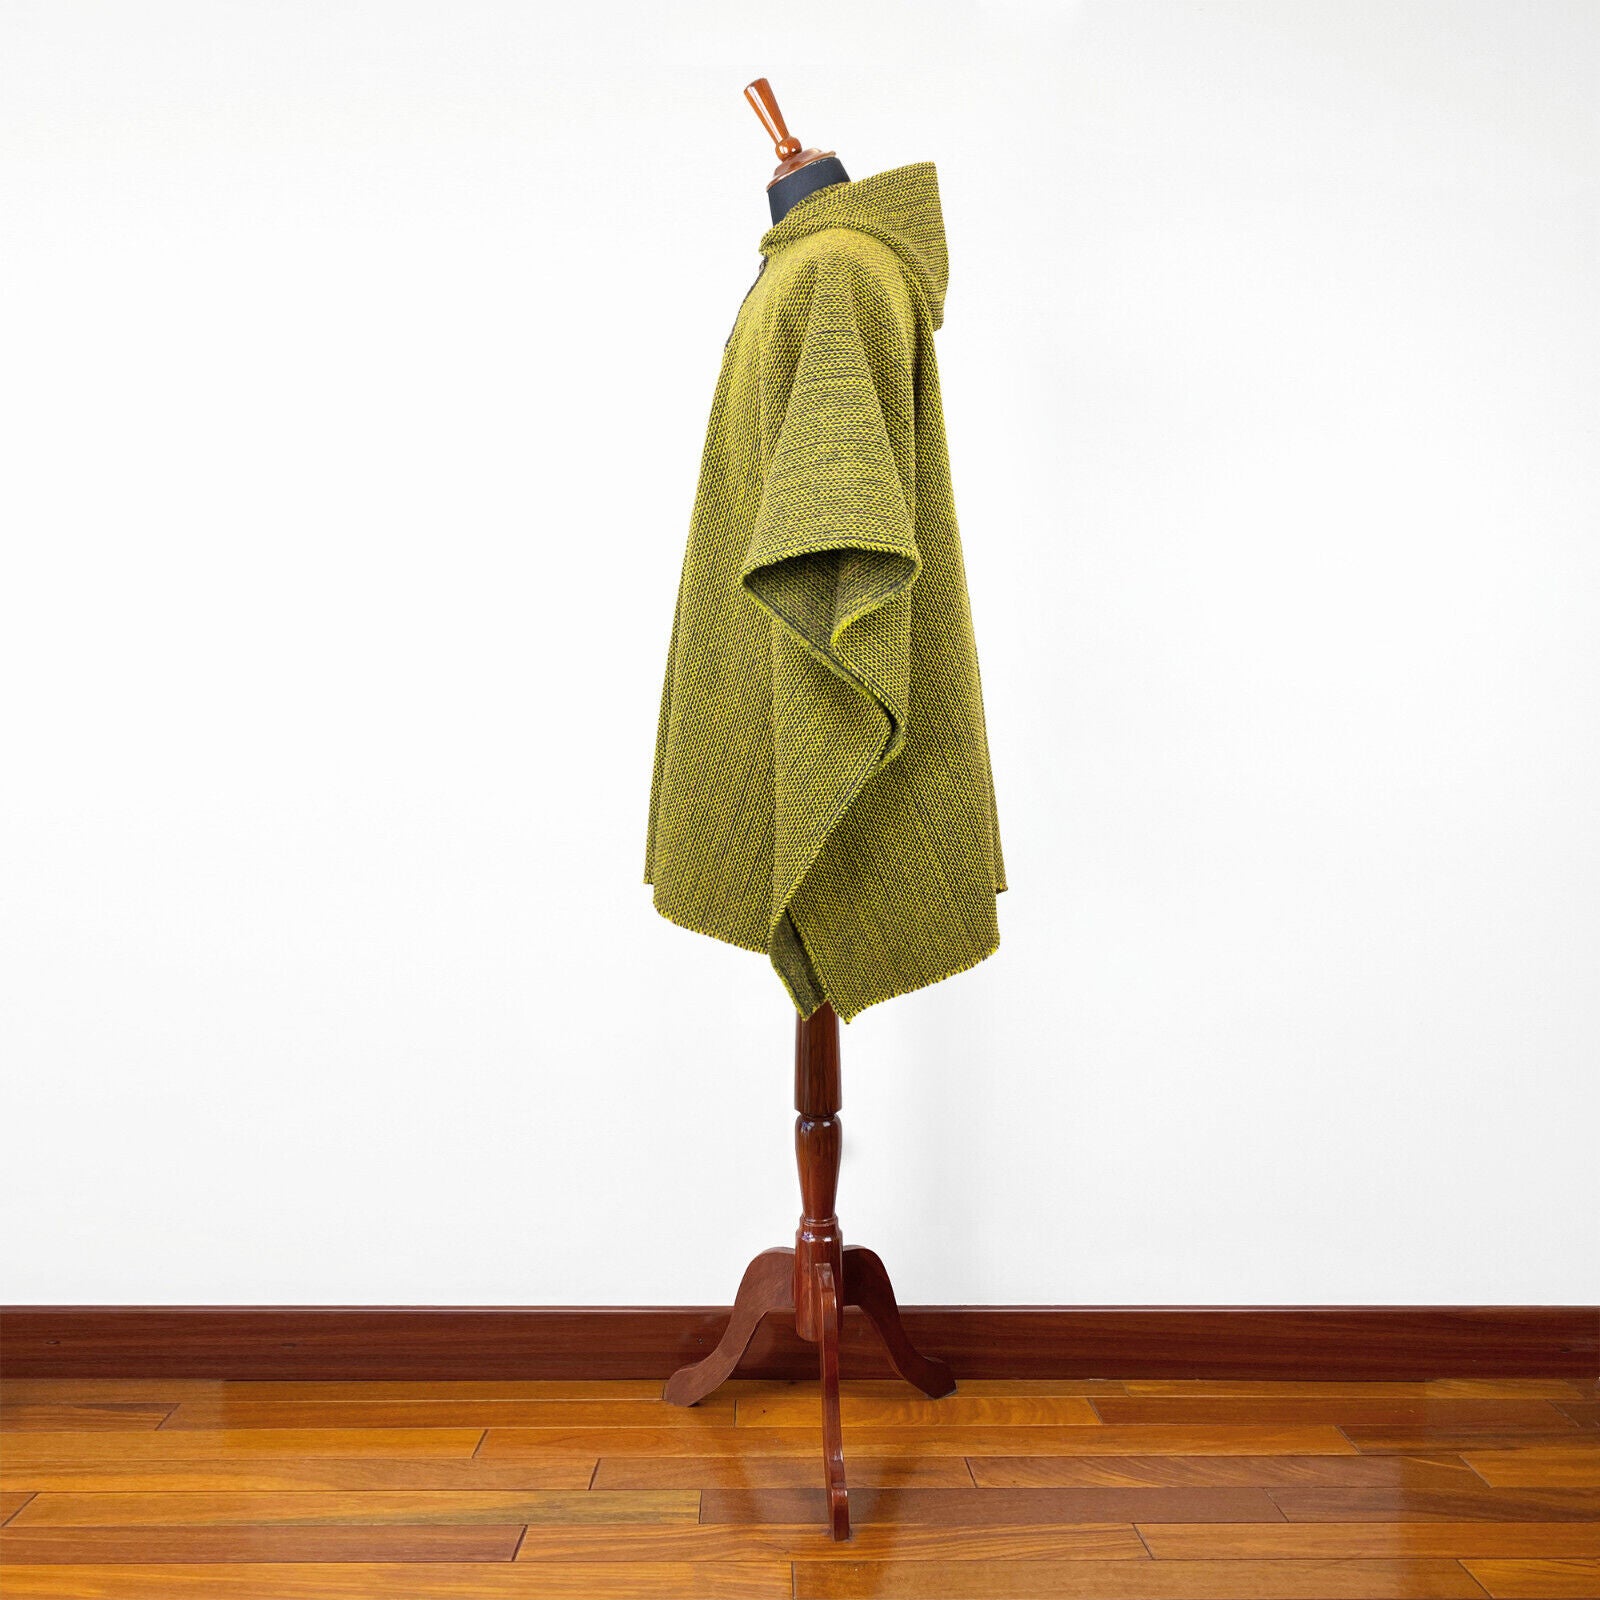 Cangochara - Llama Wool Unisex South American Handwoven Thick Hooded Poncho - solid light green/camo pattern